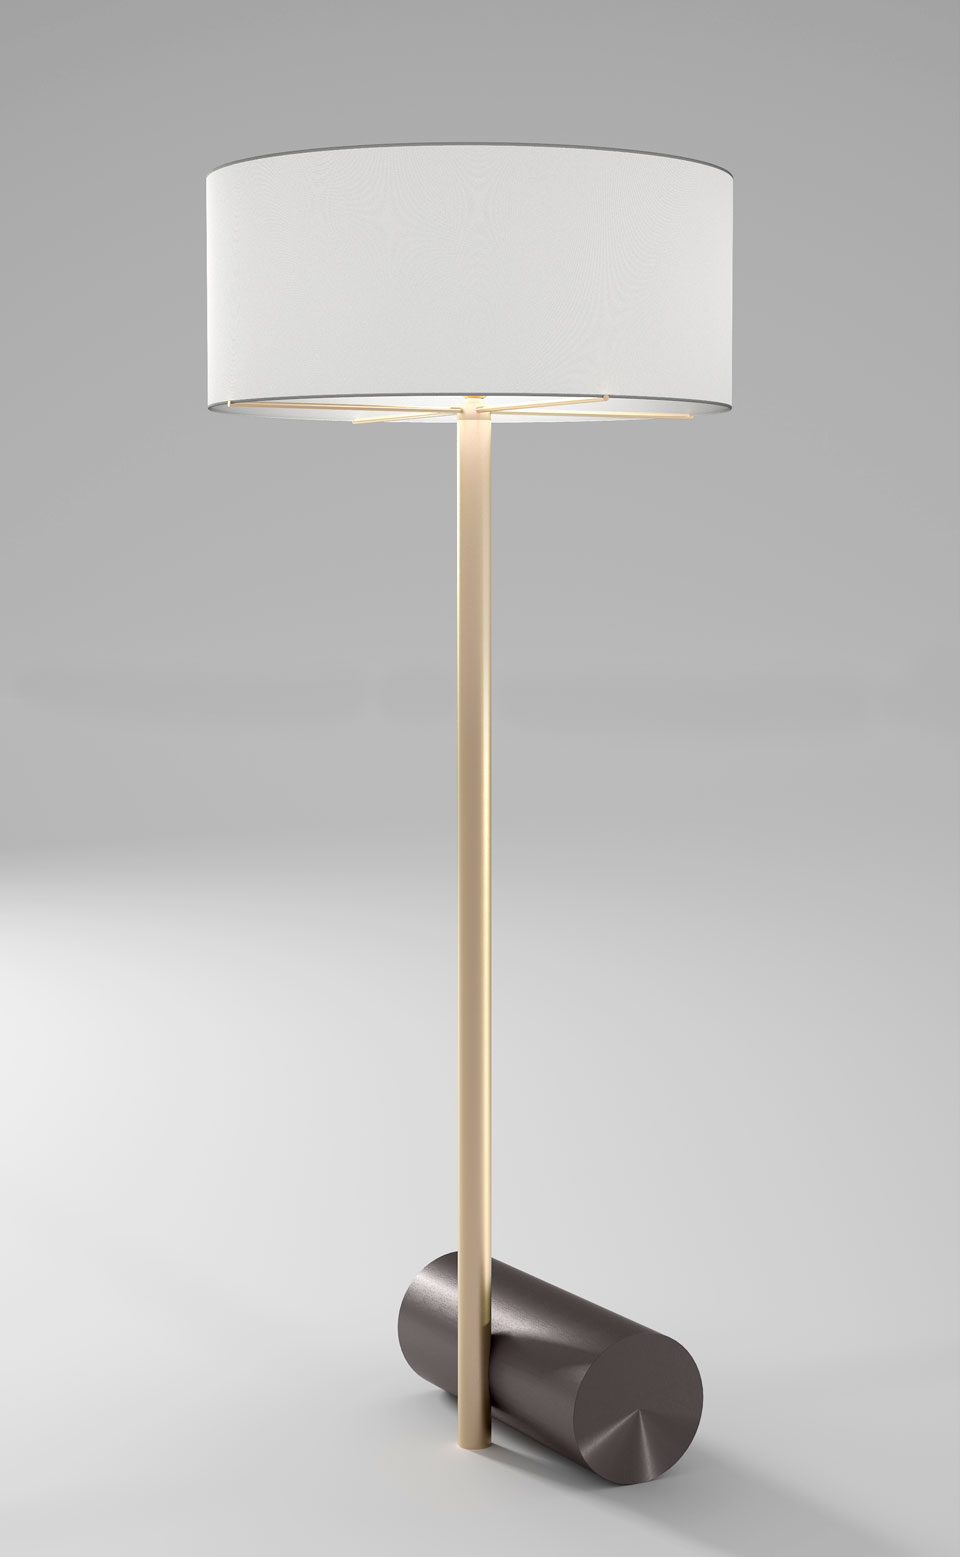 Cale Floor Lamp Graphite Base Satin Brass Foot And Cylindrical Shade In White Percaline Dimmer intended for dimensions 960 X 1557